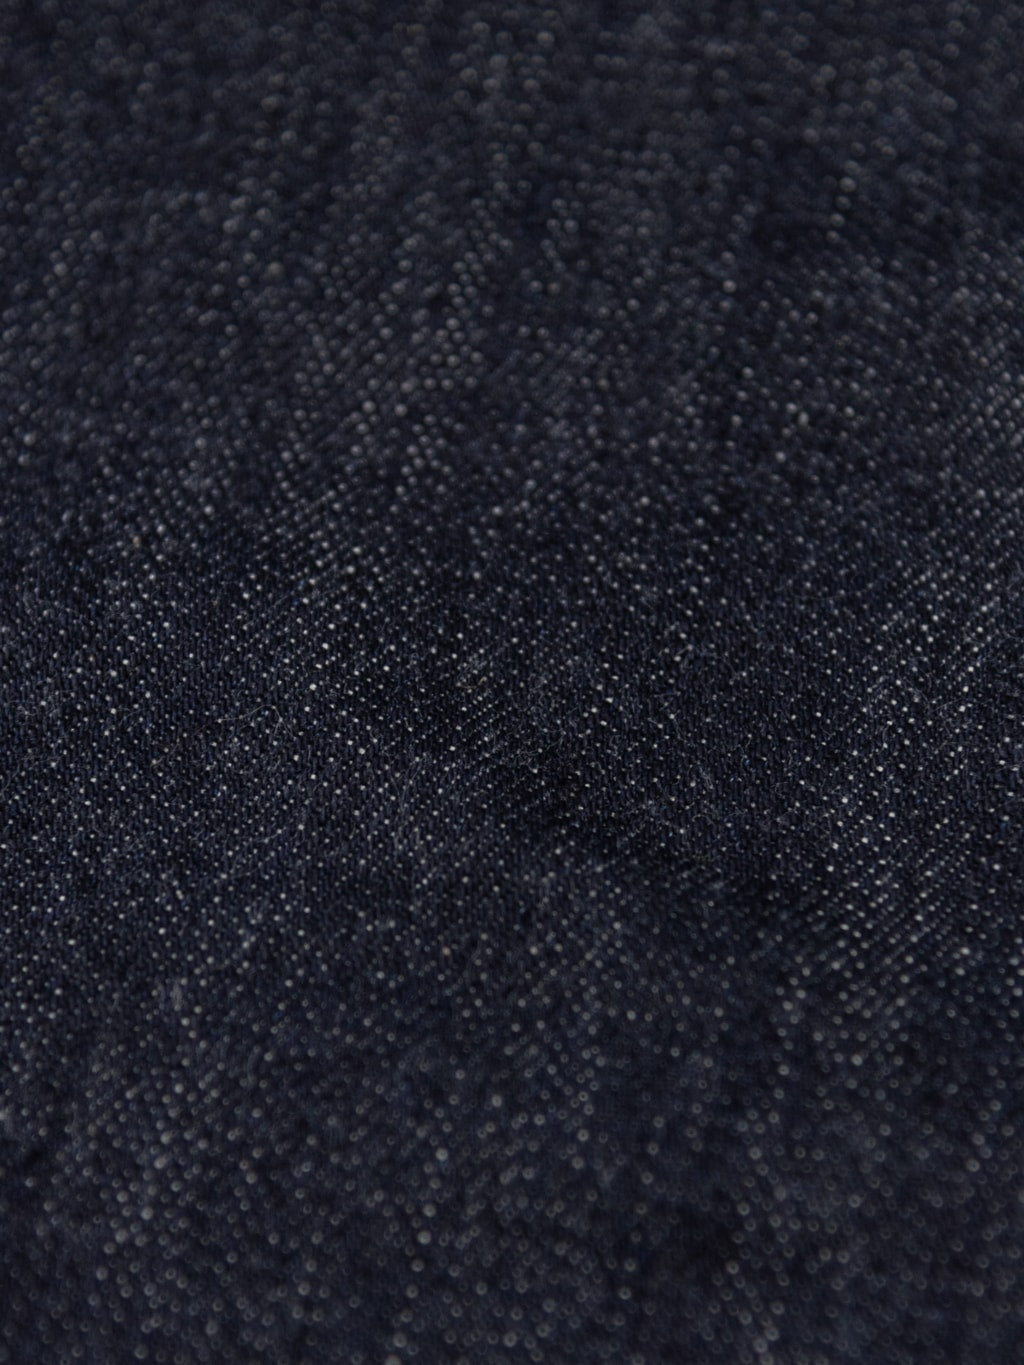 The Flat Head 3002 14.5oz Slim Tapered selvedge Jeans texture